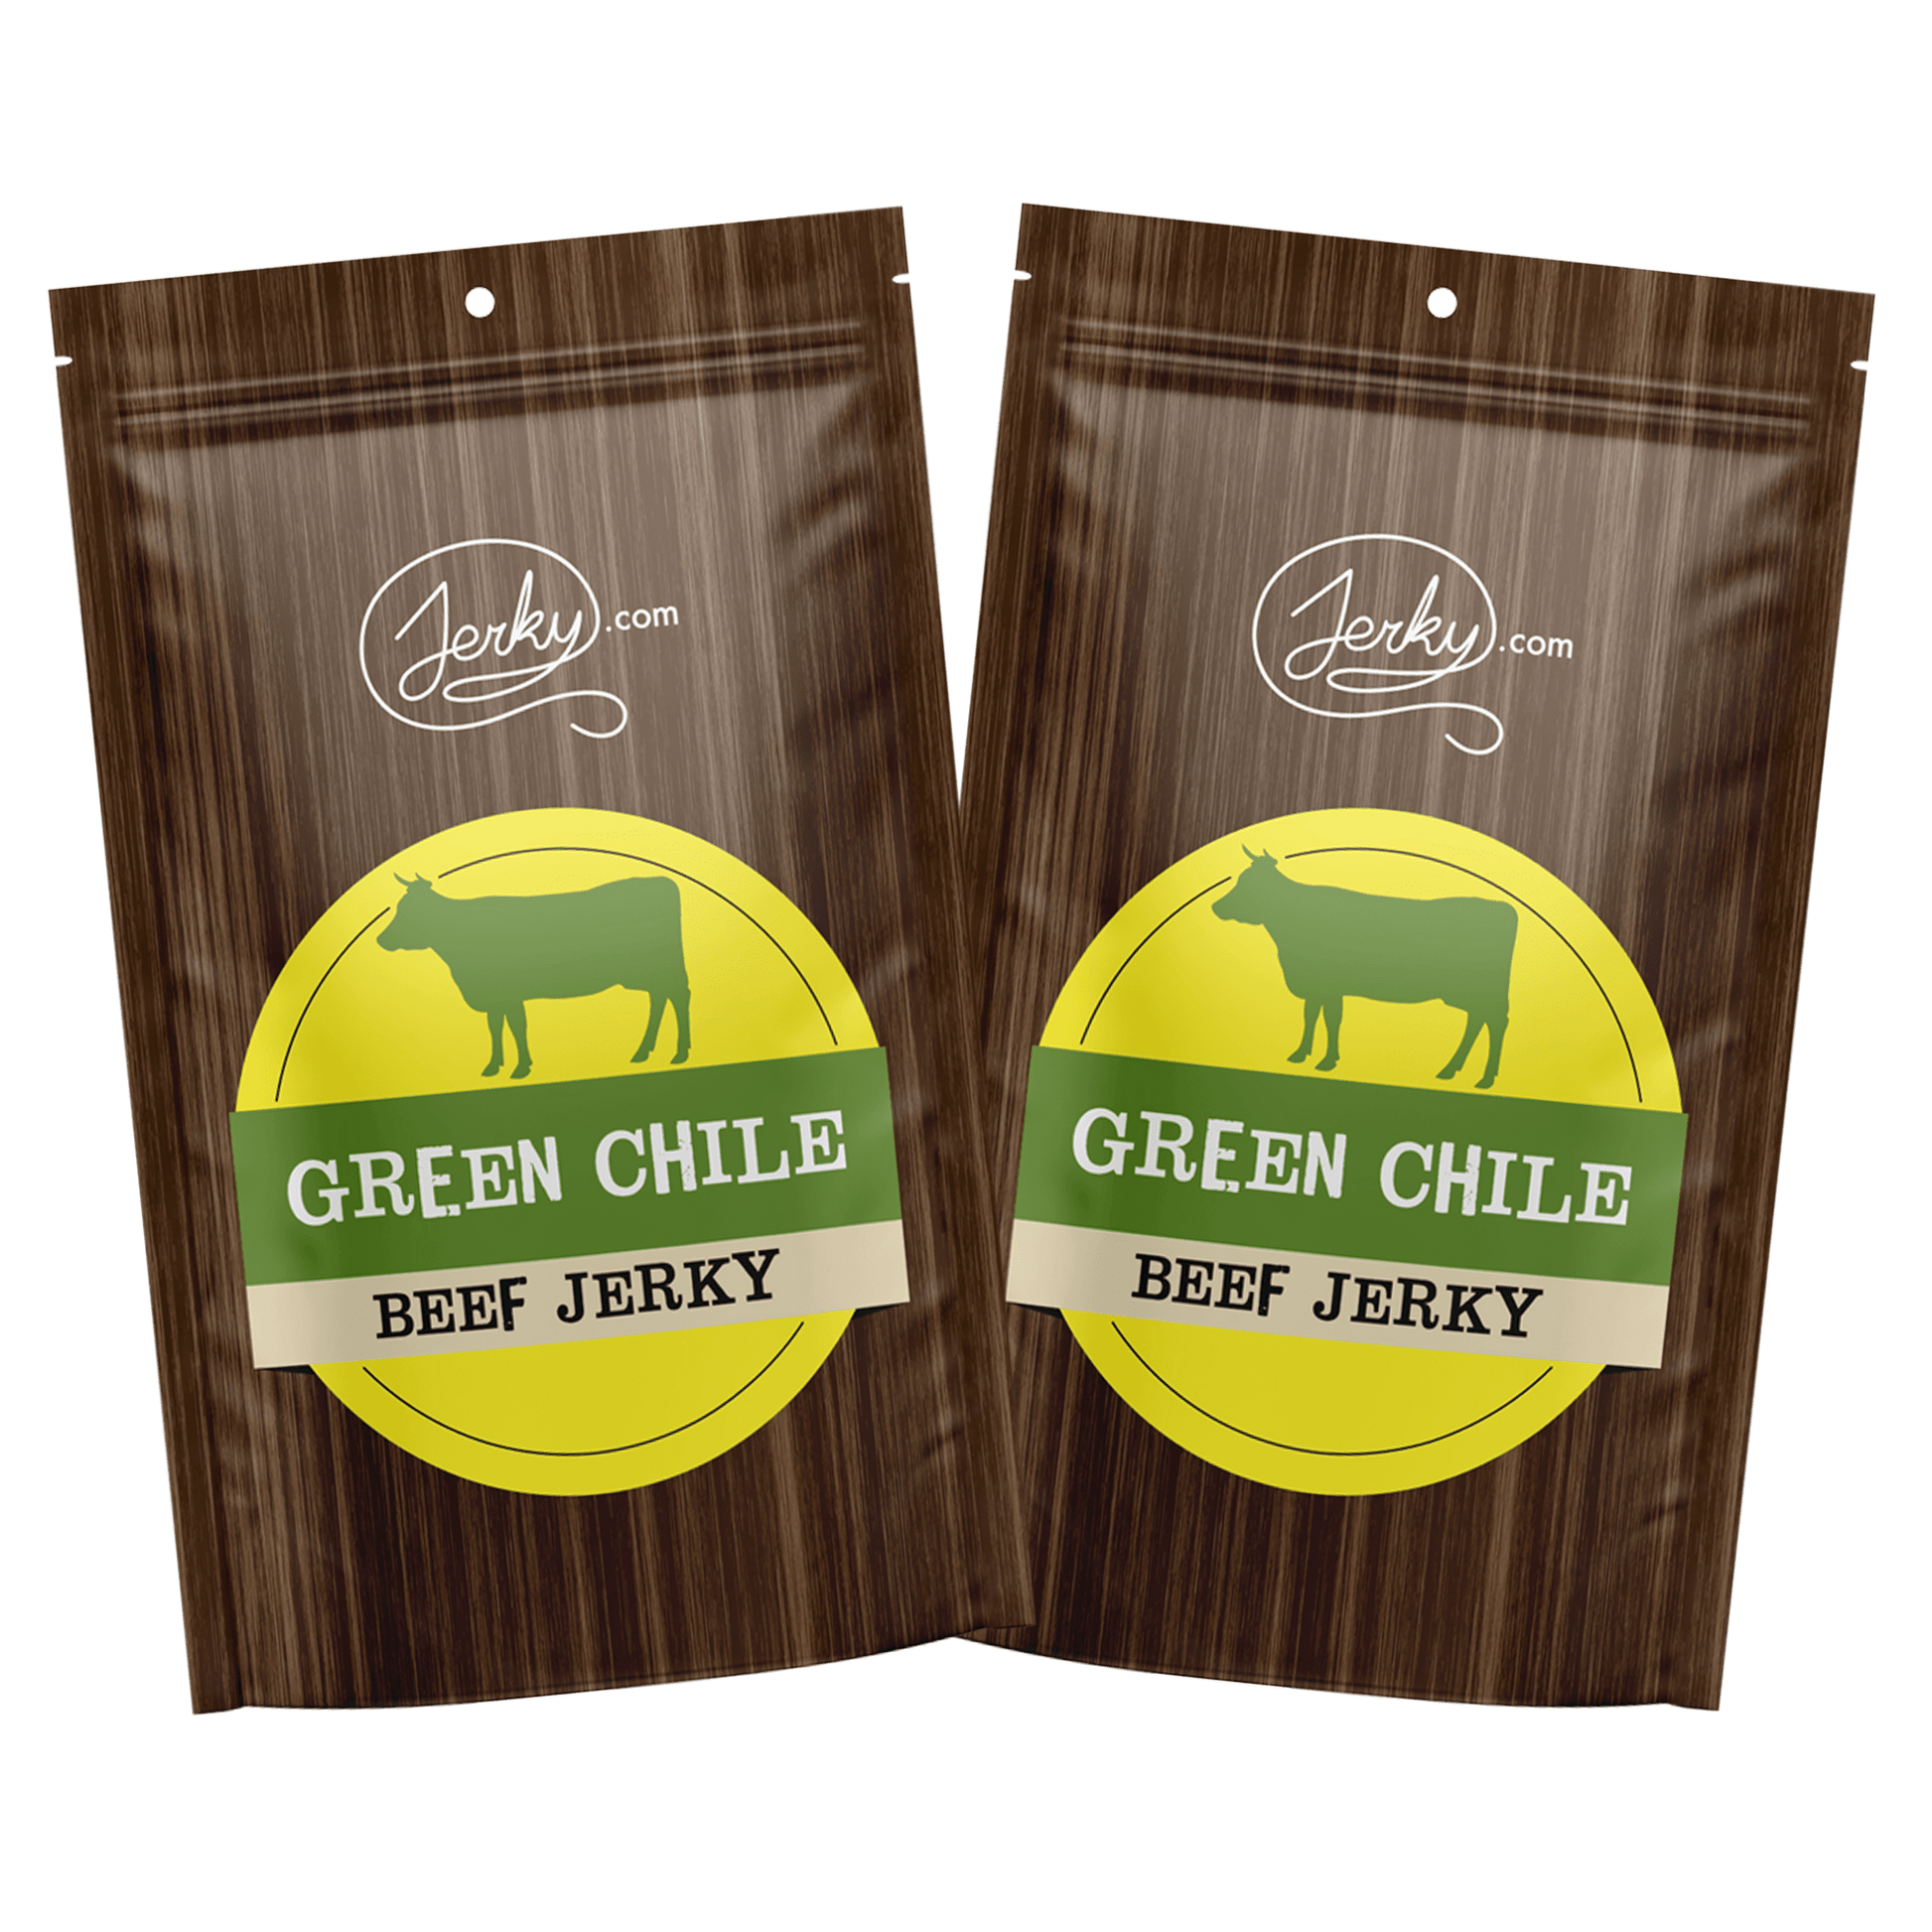 All-Natural Beef Jerky - Green Chile by Jerky.com